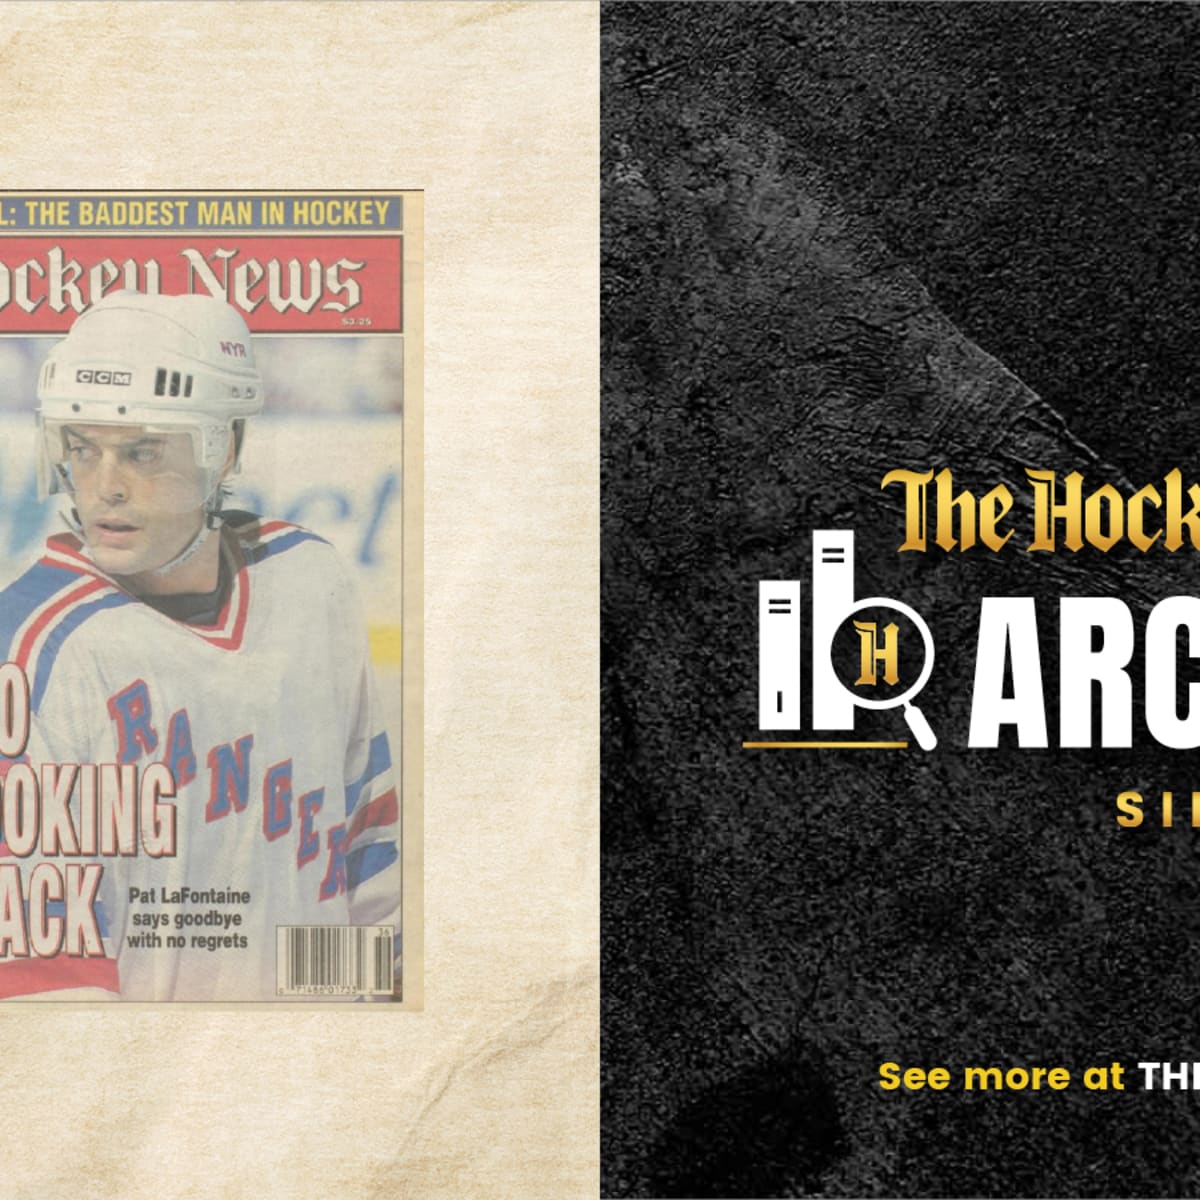 THN Archive: LaFontaine's Hall of Fame Career Cut Short By Head